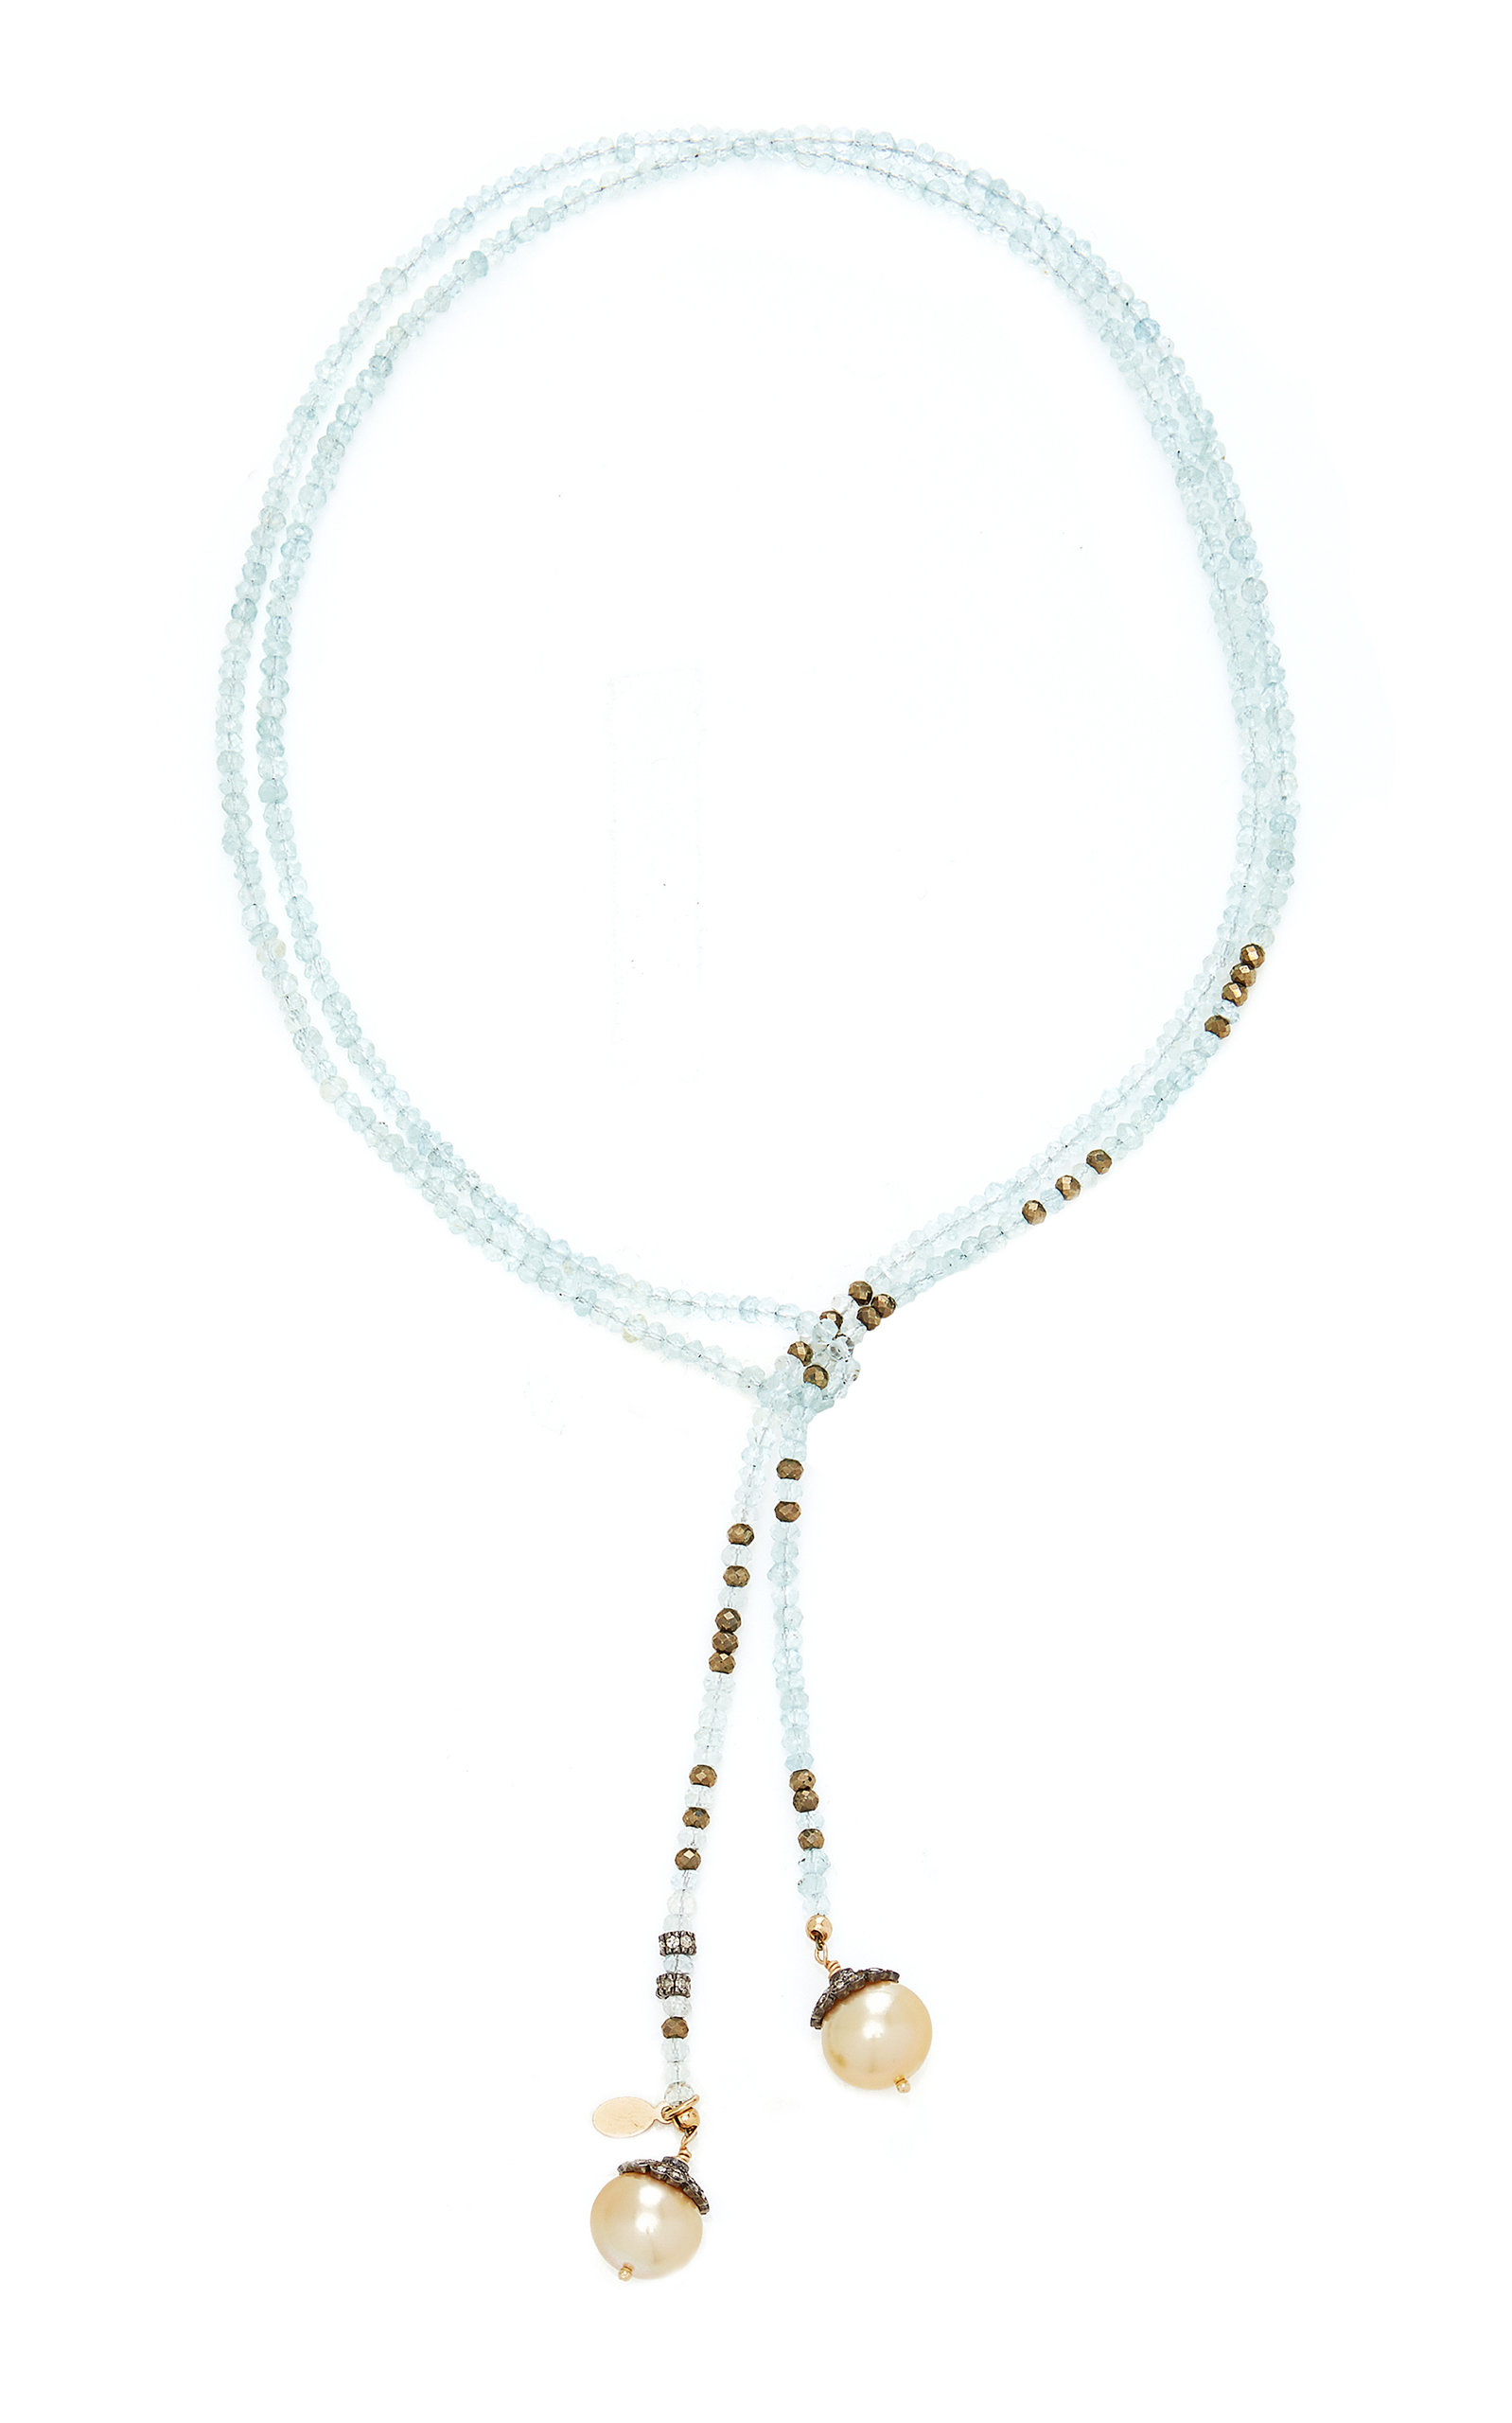 Joie DiGiovanni Women's 14K Gold; Aquamarine; Pyrite and Pearl Necklace